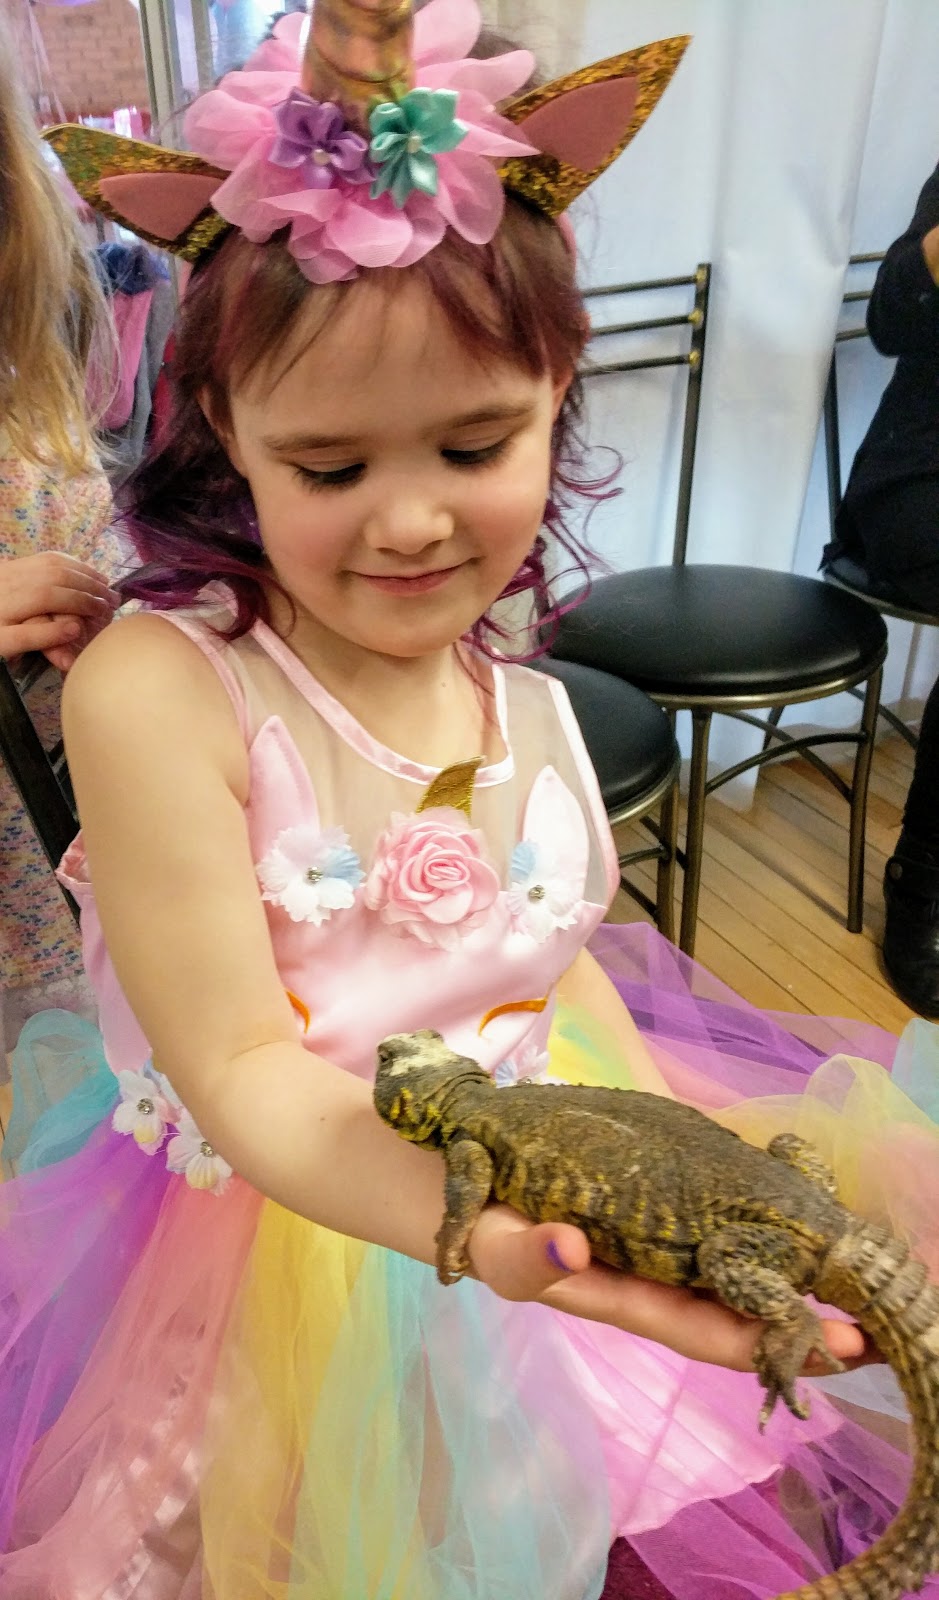 Pawleys Reptiles and Educational Shows | pet store | Sunnydale Pl, Waterloo, ON N2L 4S9, Canada | 2262206446 OR +1 226-220-6446